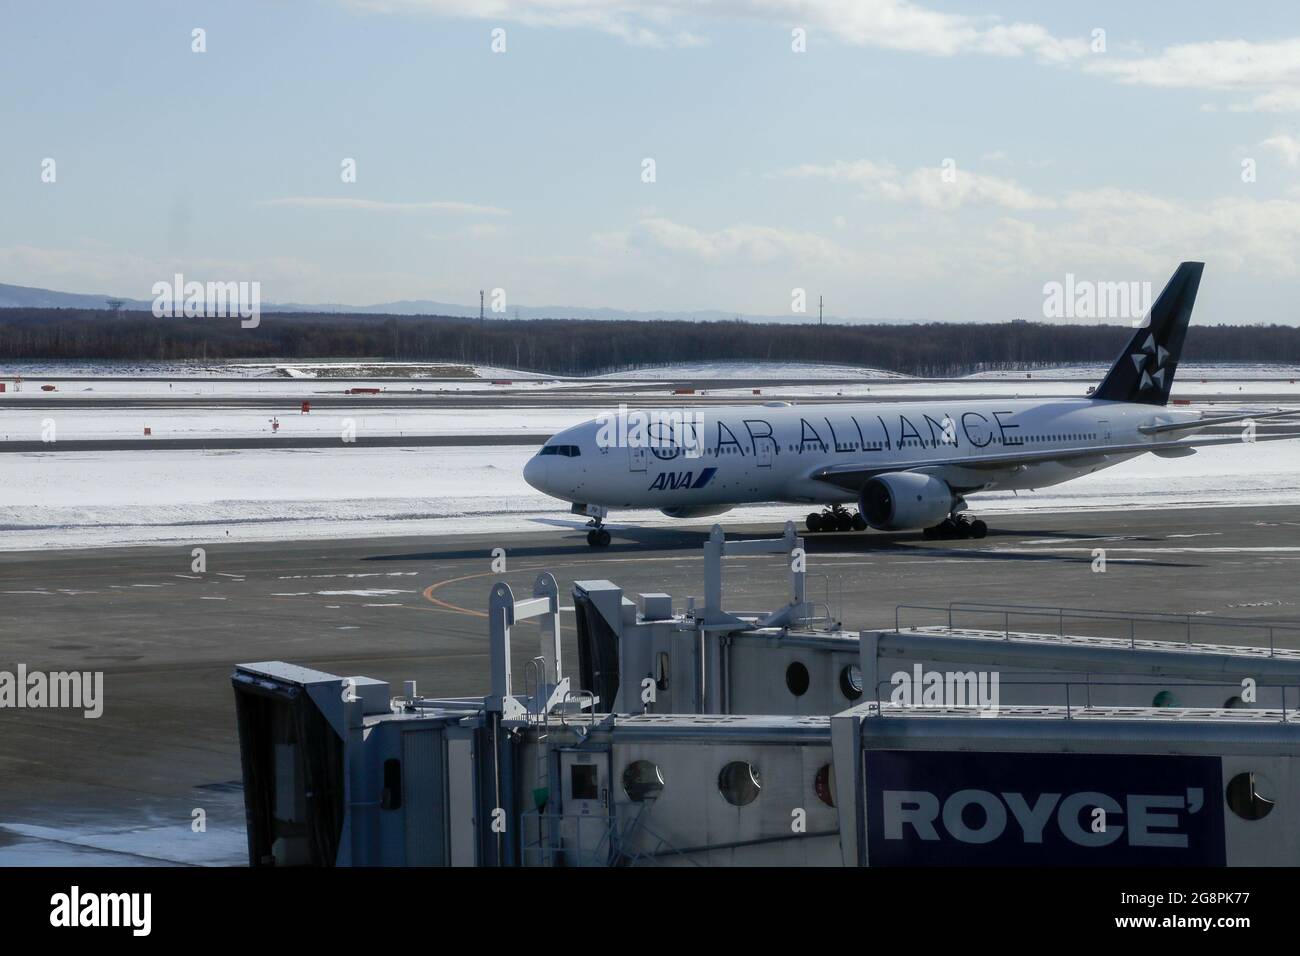 New Chitose, Hokkaido, Japan-December 21, 2017: Airplane stop for support service and transfer passenger, this picture was capture at airport waiting Stock Photo